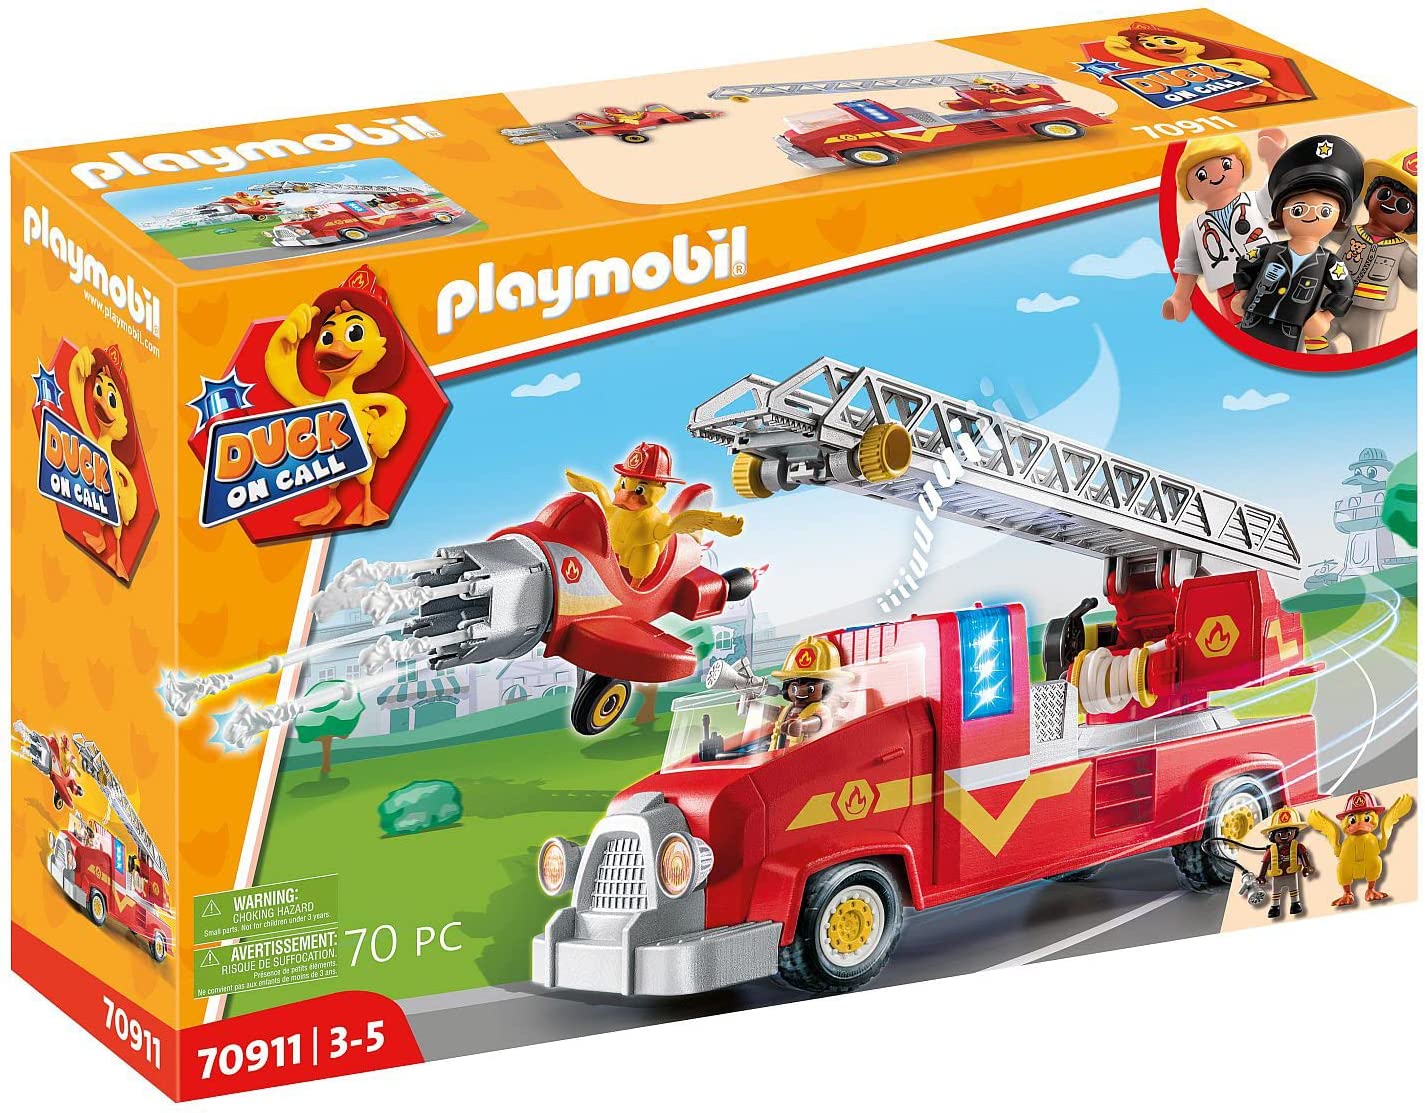 PLAYMOBIL Duck On Call 70911 Fire Brigade Truck with Helicopter, Light and Sound, Toy for Children from 3 Years